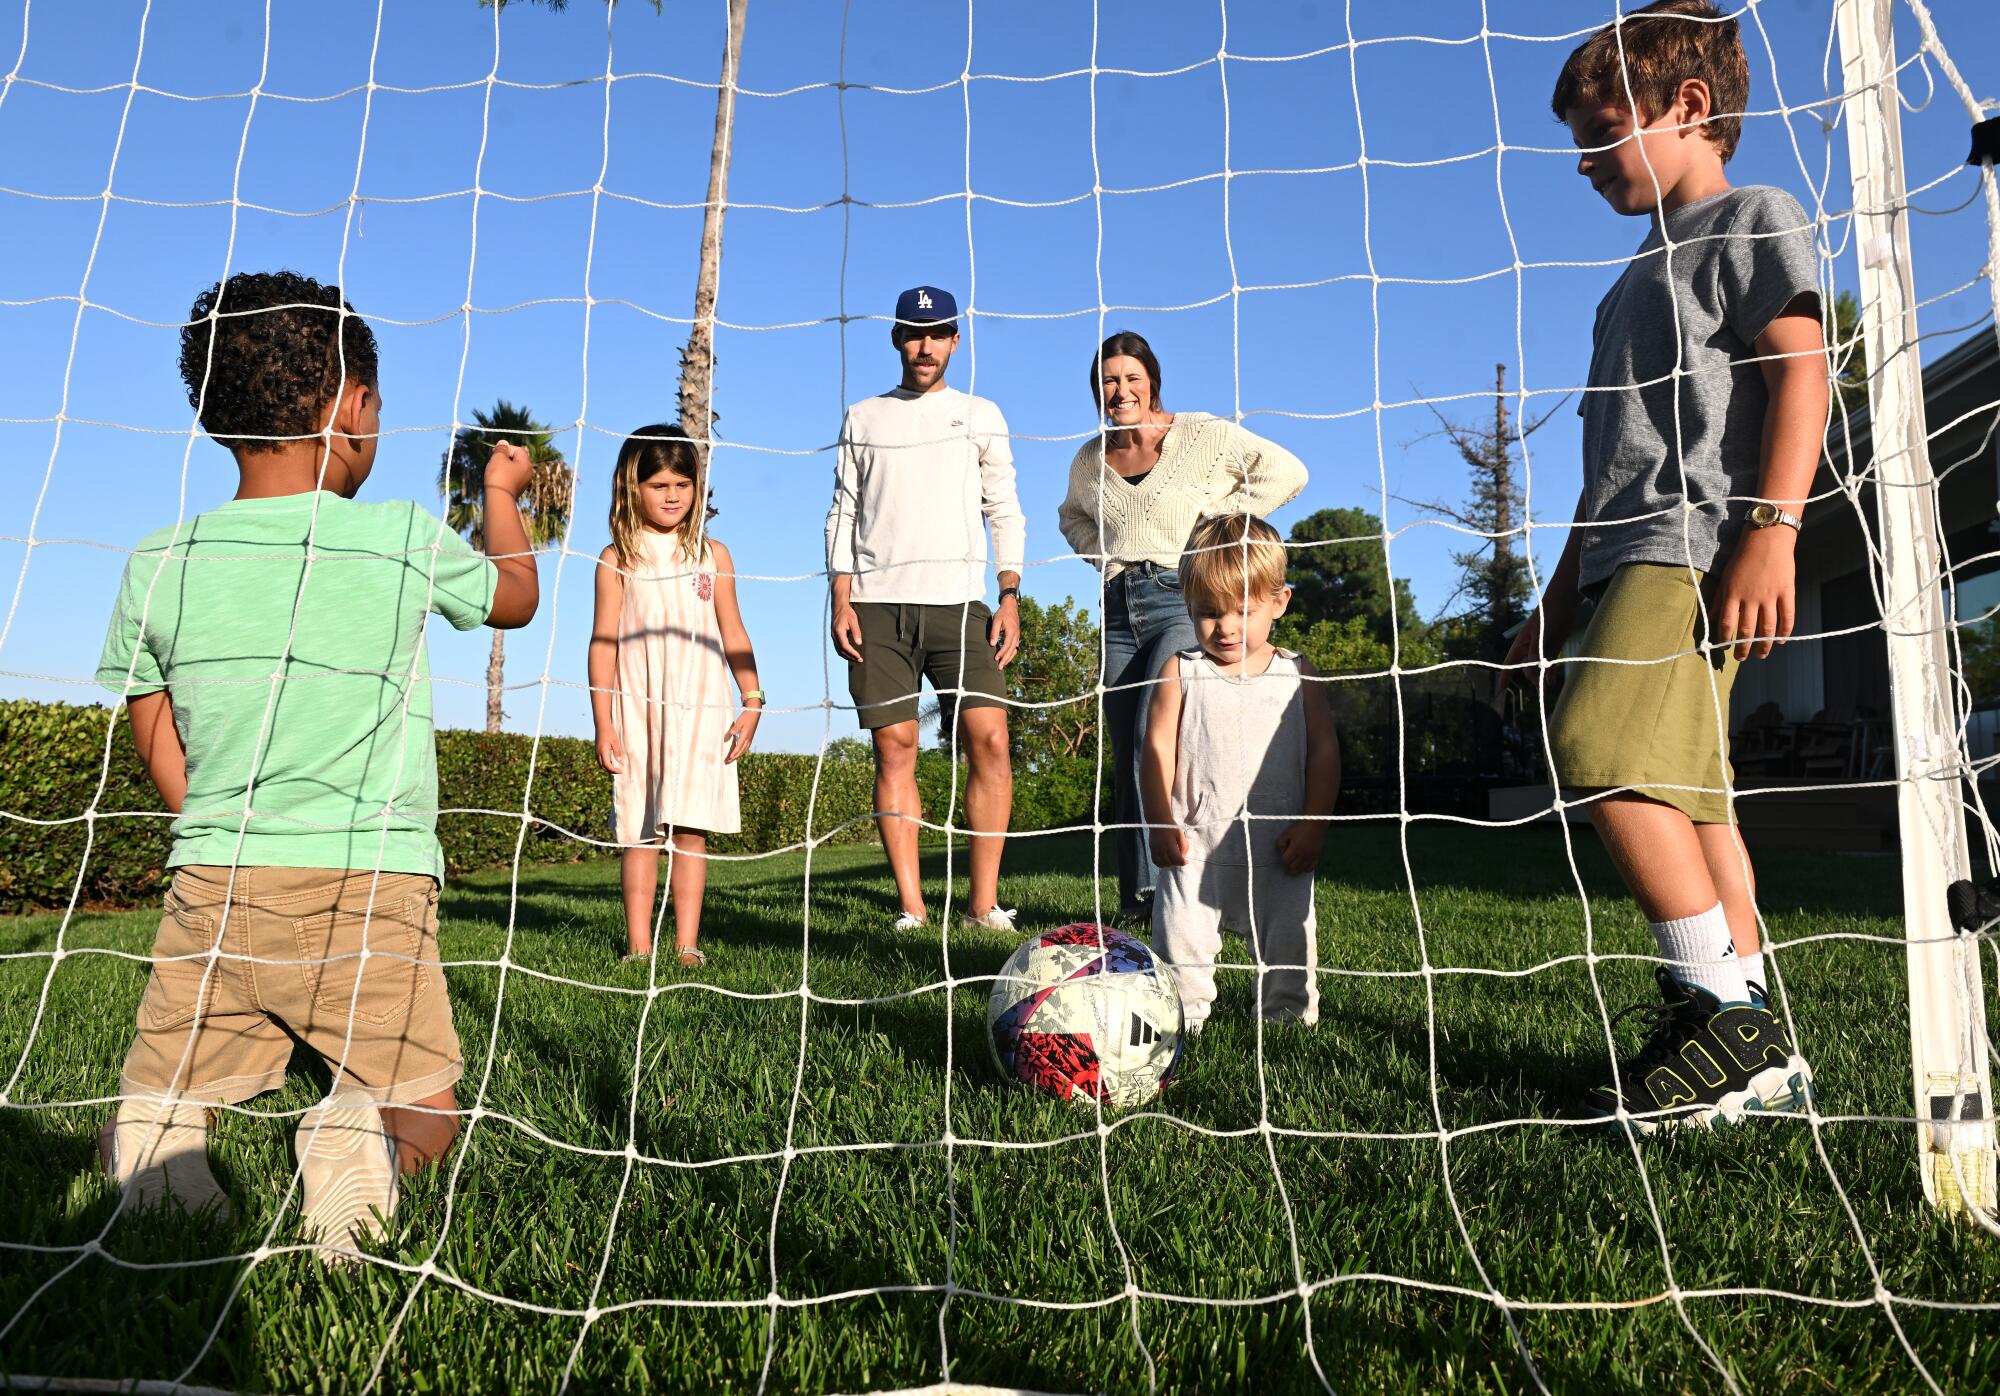 LAFC defender Ryan Hollingshead and his wife, Taylor, play soccer with their children